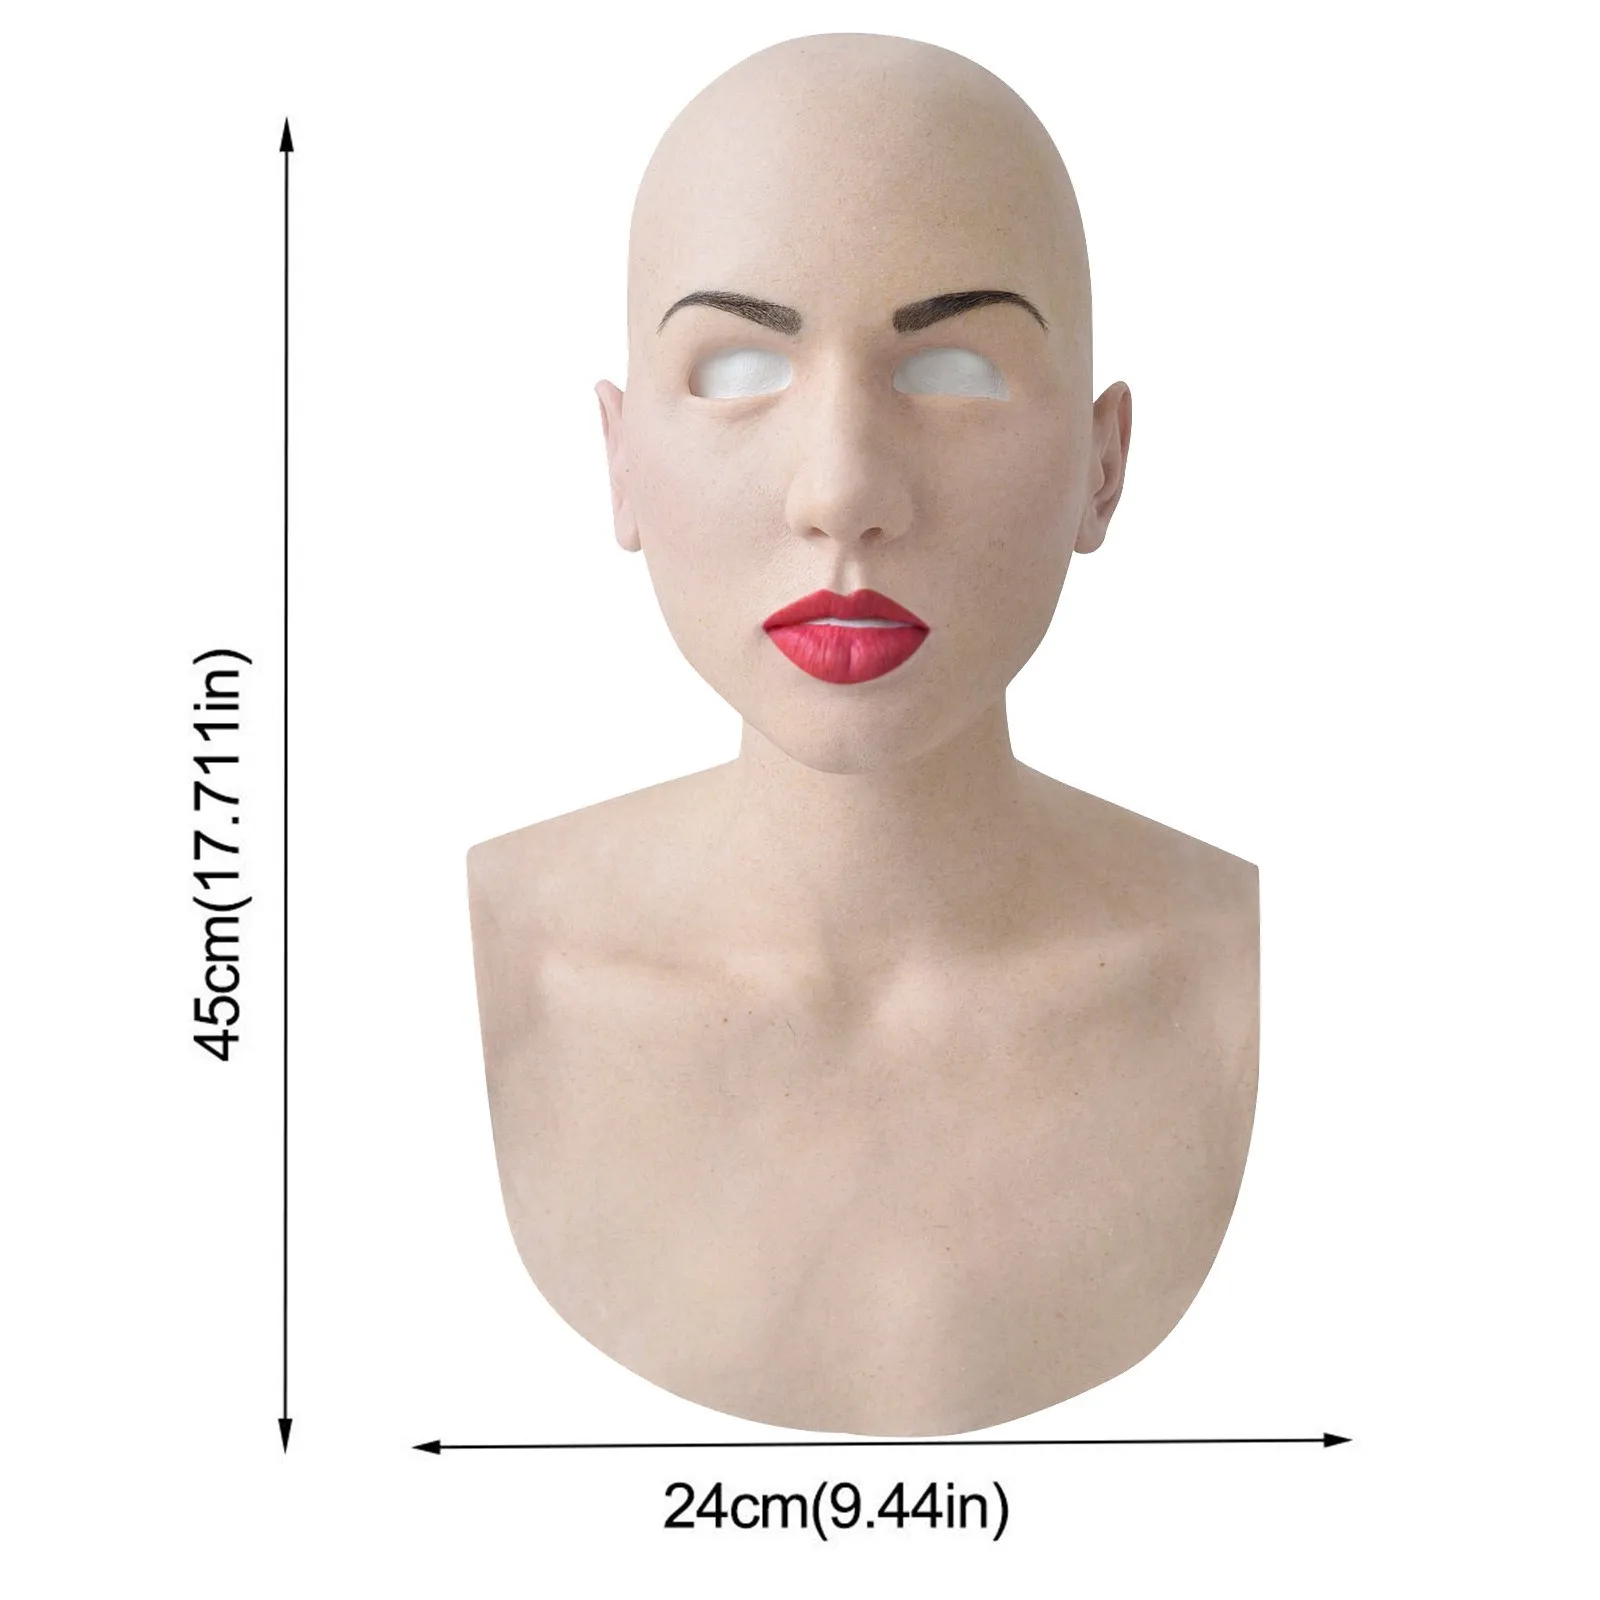 

Halloween Holiday Funny Masks Creepy Wrinkle Face Mask Latex Supersoft Woman Adult Cosplay Party Props Novelty Gag Toys Gifts W*